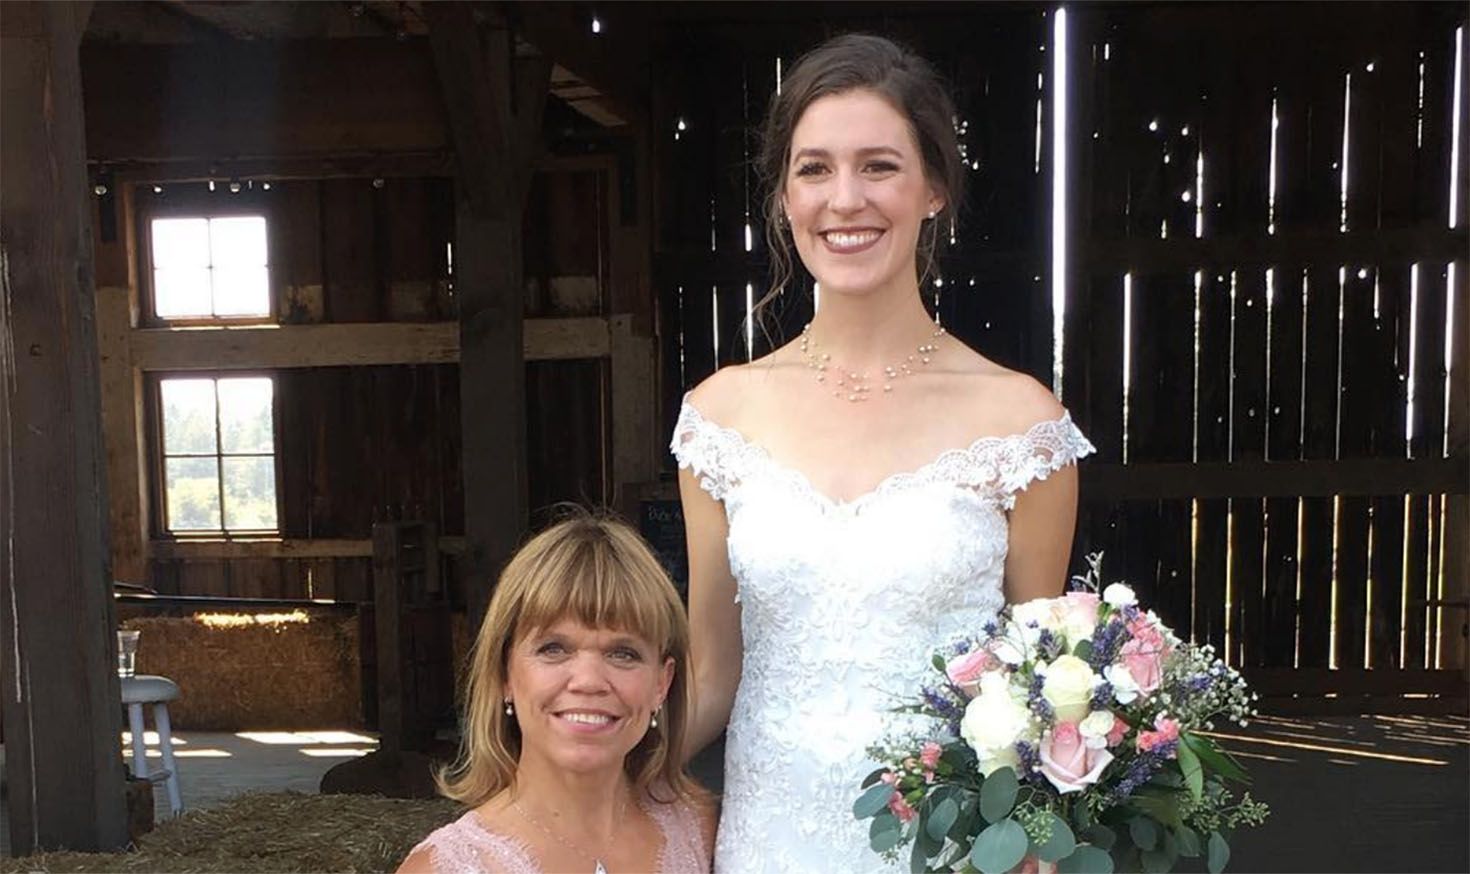 What Happened to Molly Roloff? Her Life After Little People, Big World